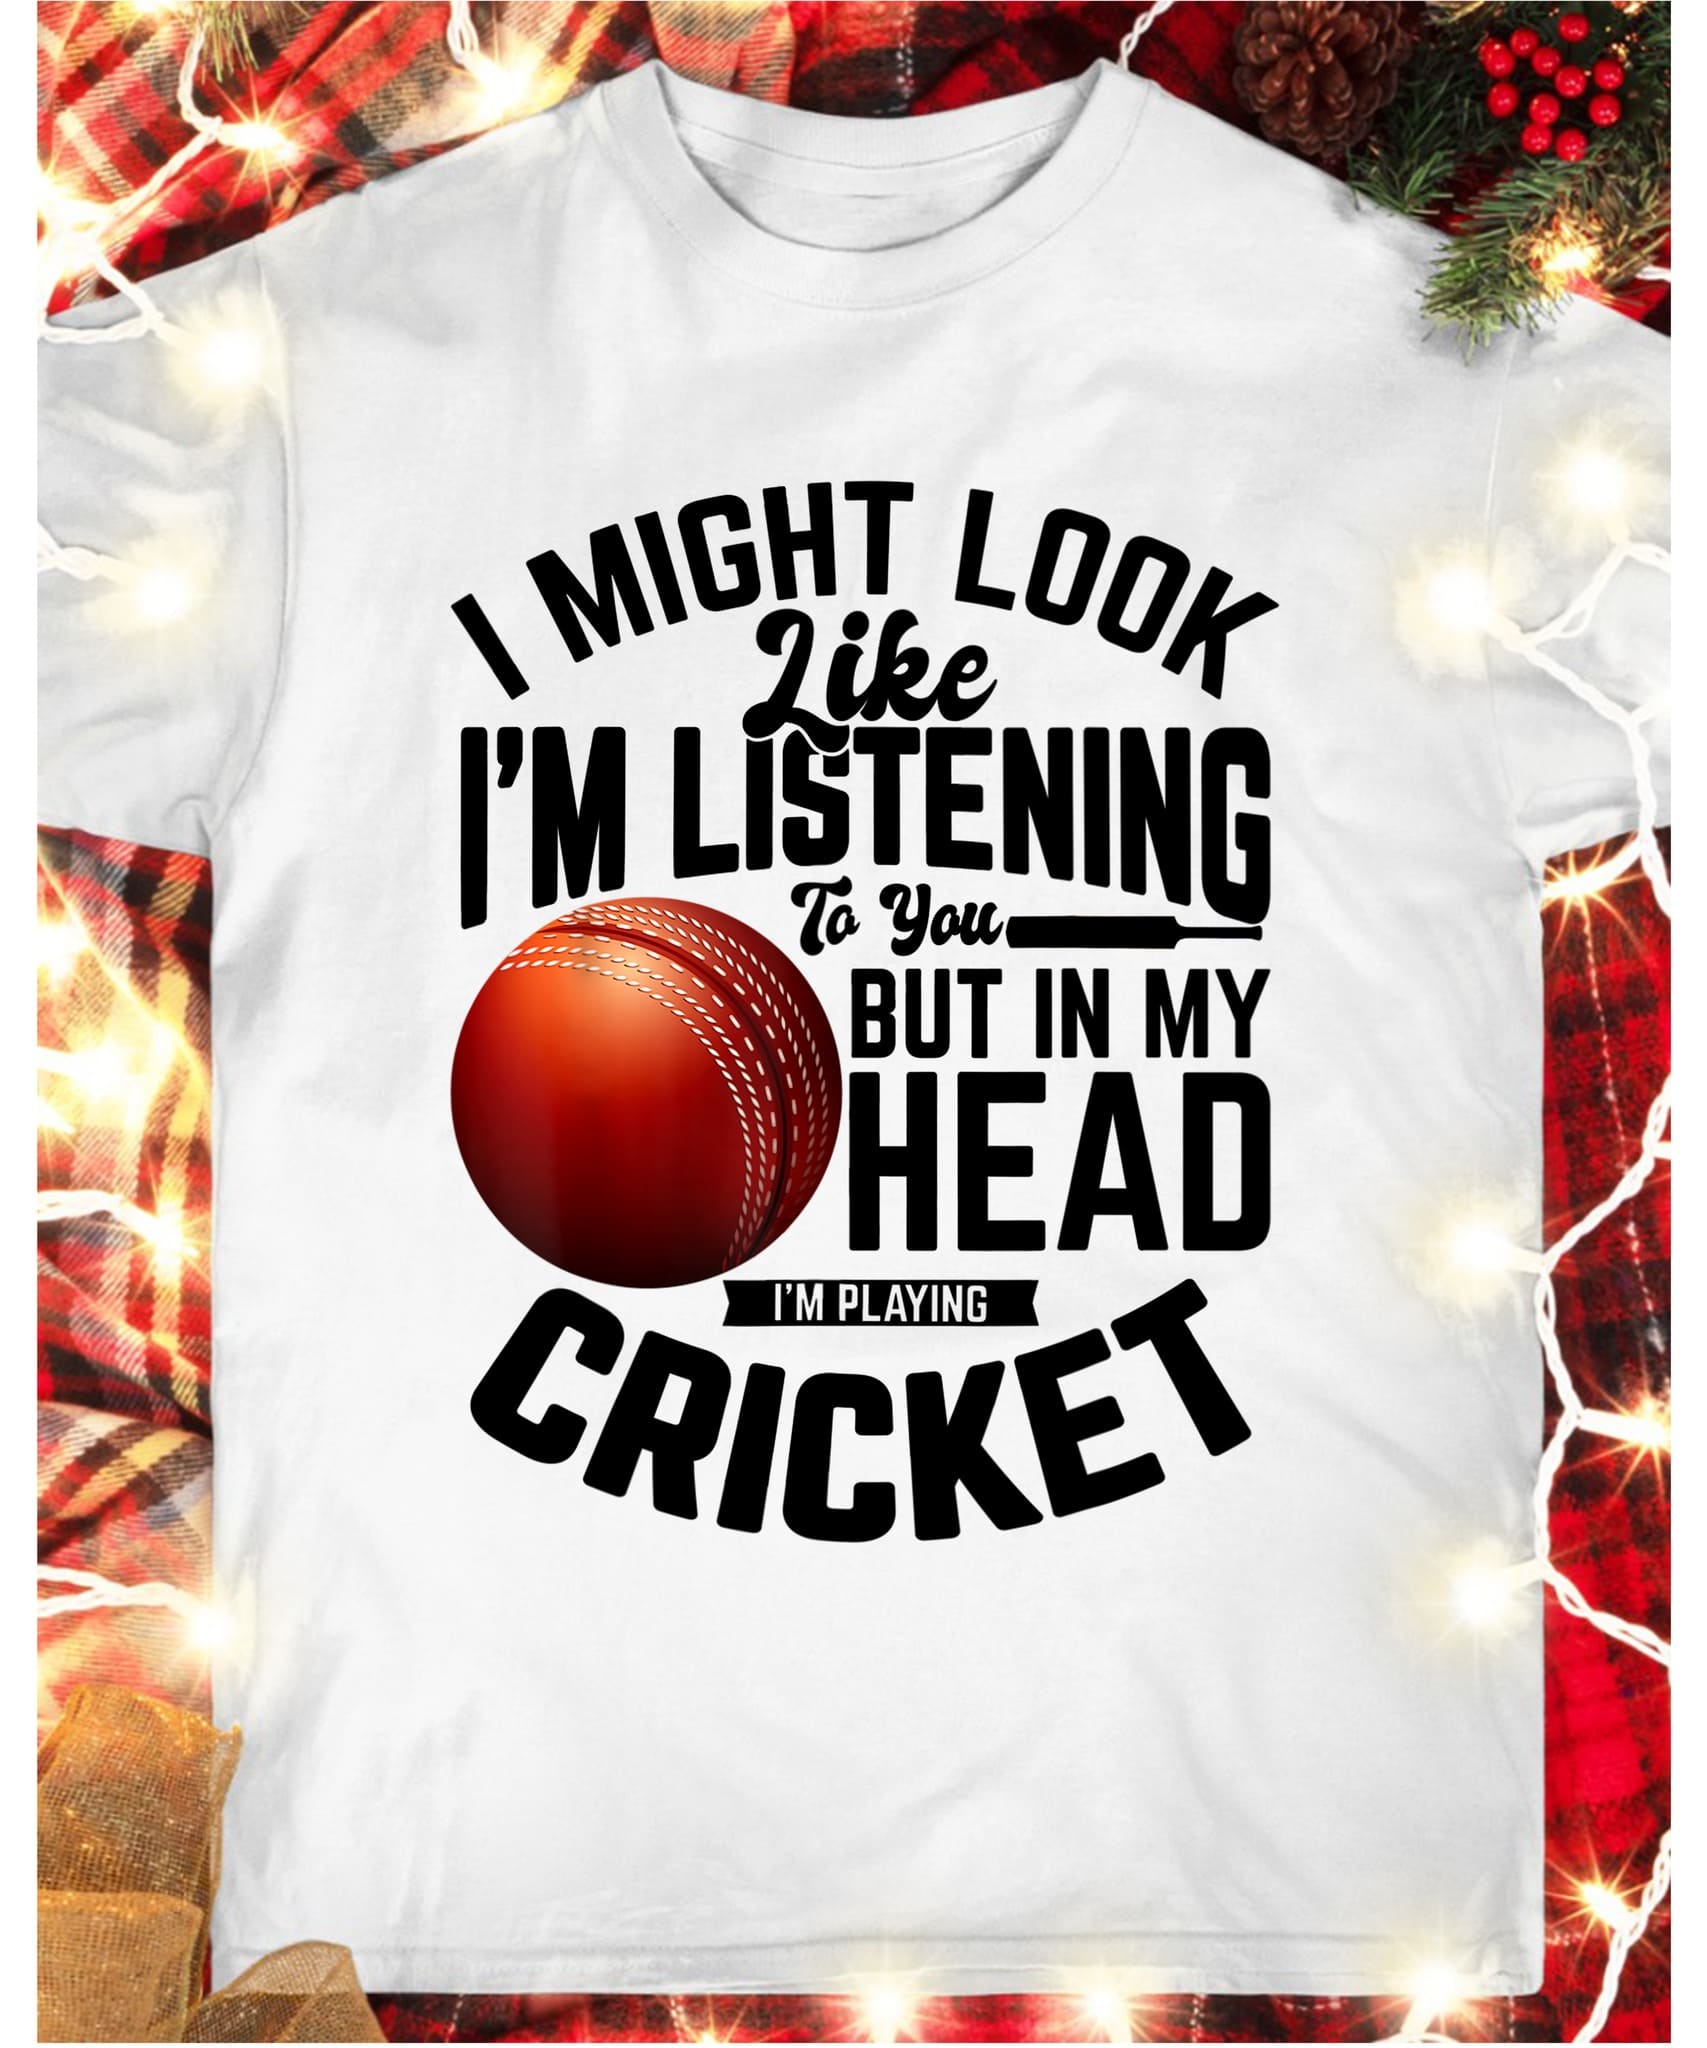 I might look like I'm listening to you but in my head I'm play cricket - Cricket player T-shirt